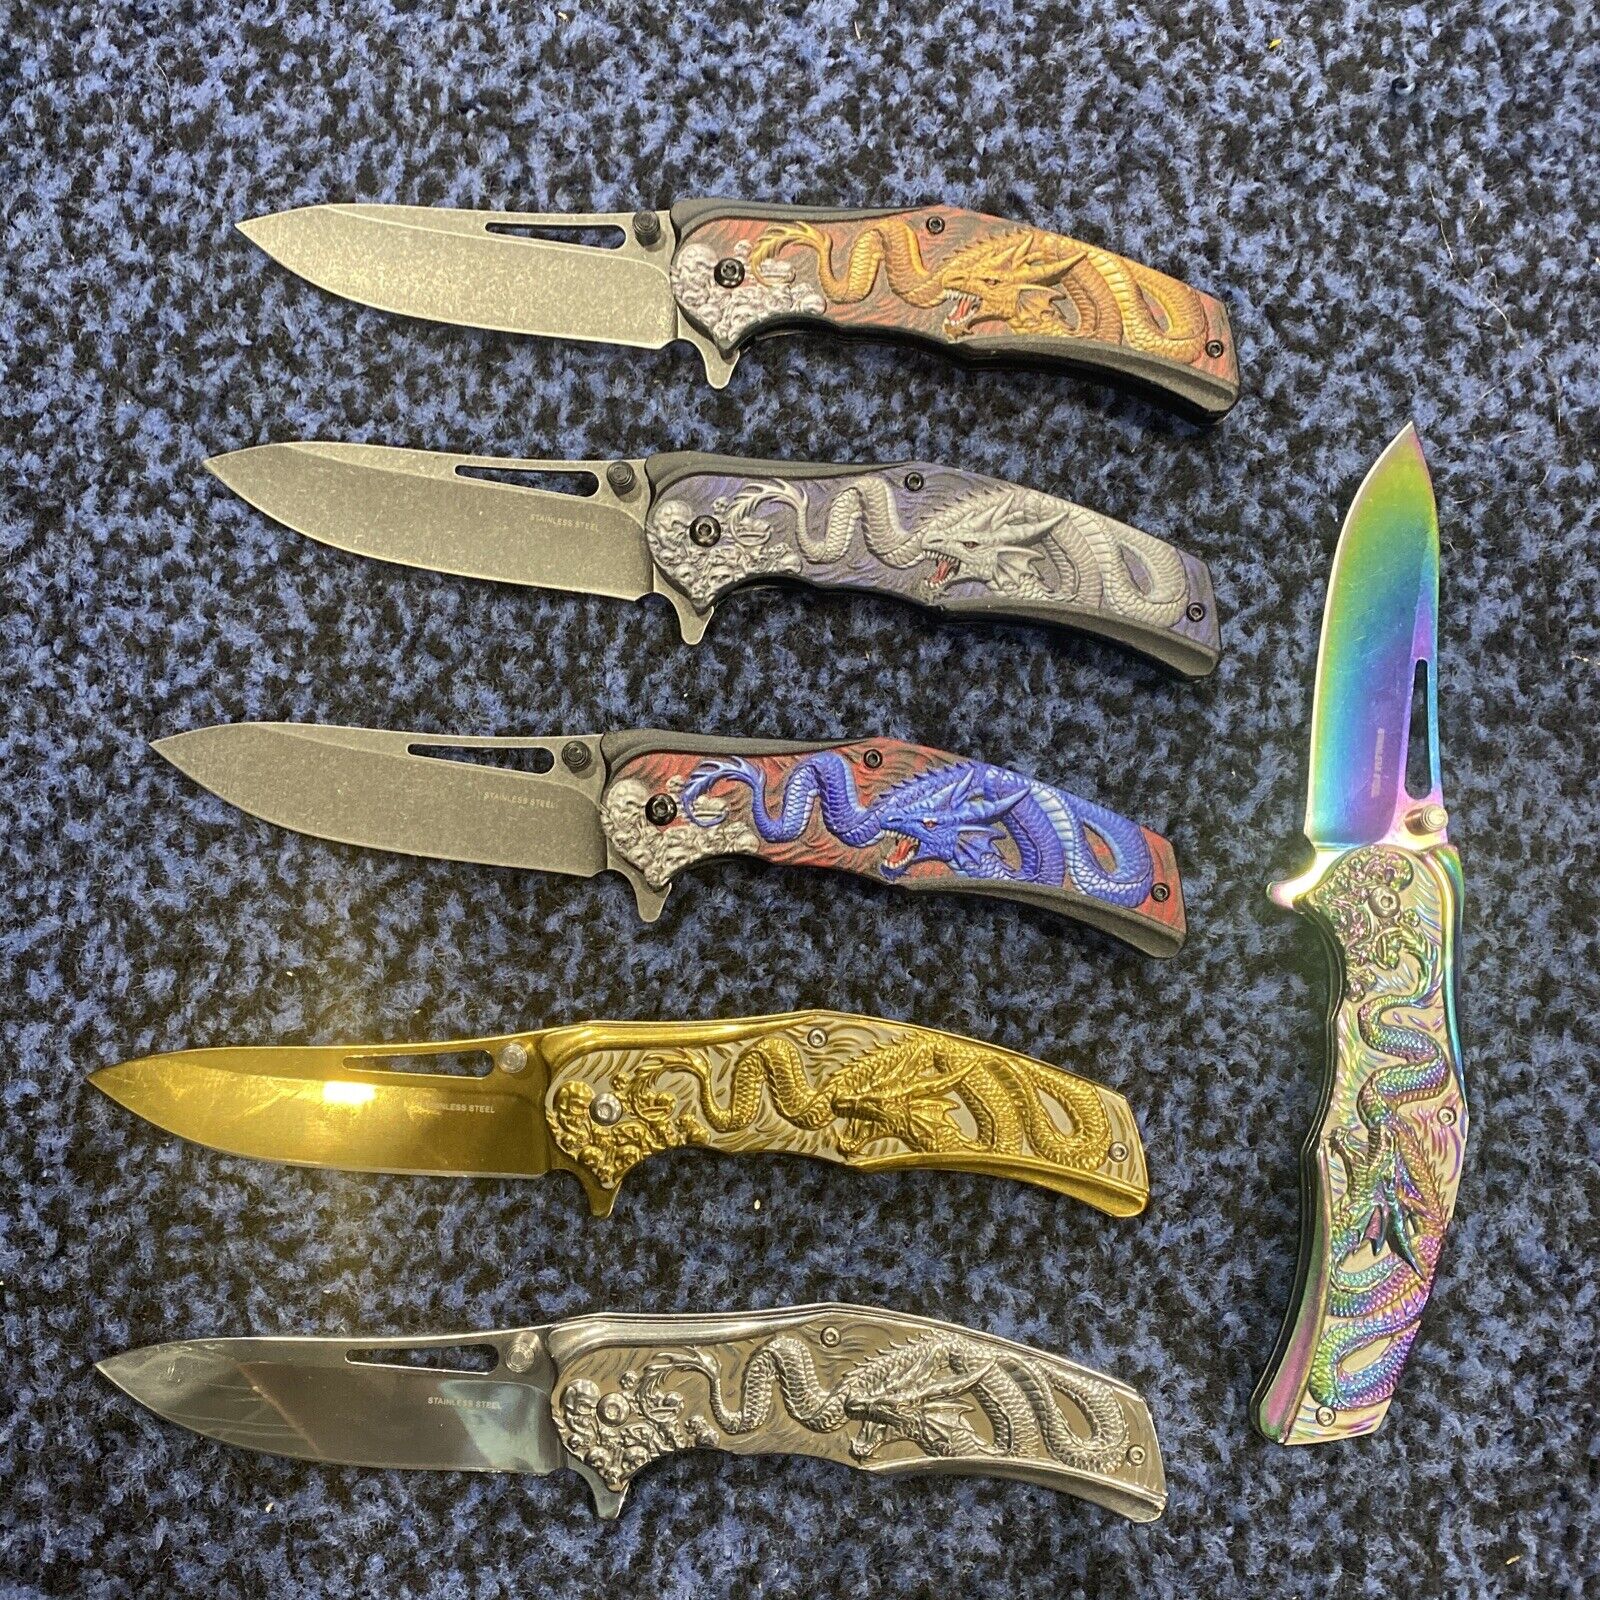 6pcs Mixed Dragon Design Spring Assisted Open Blade Pocket Knife New